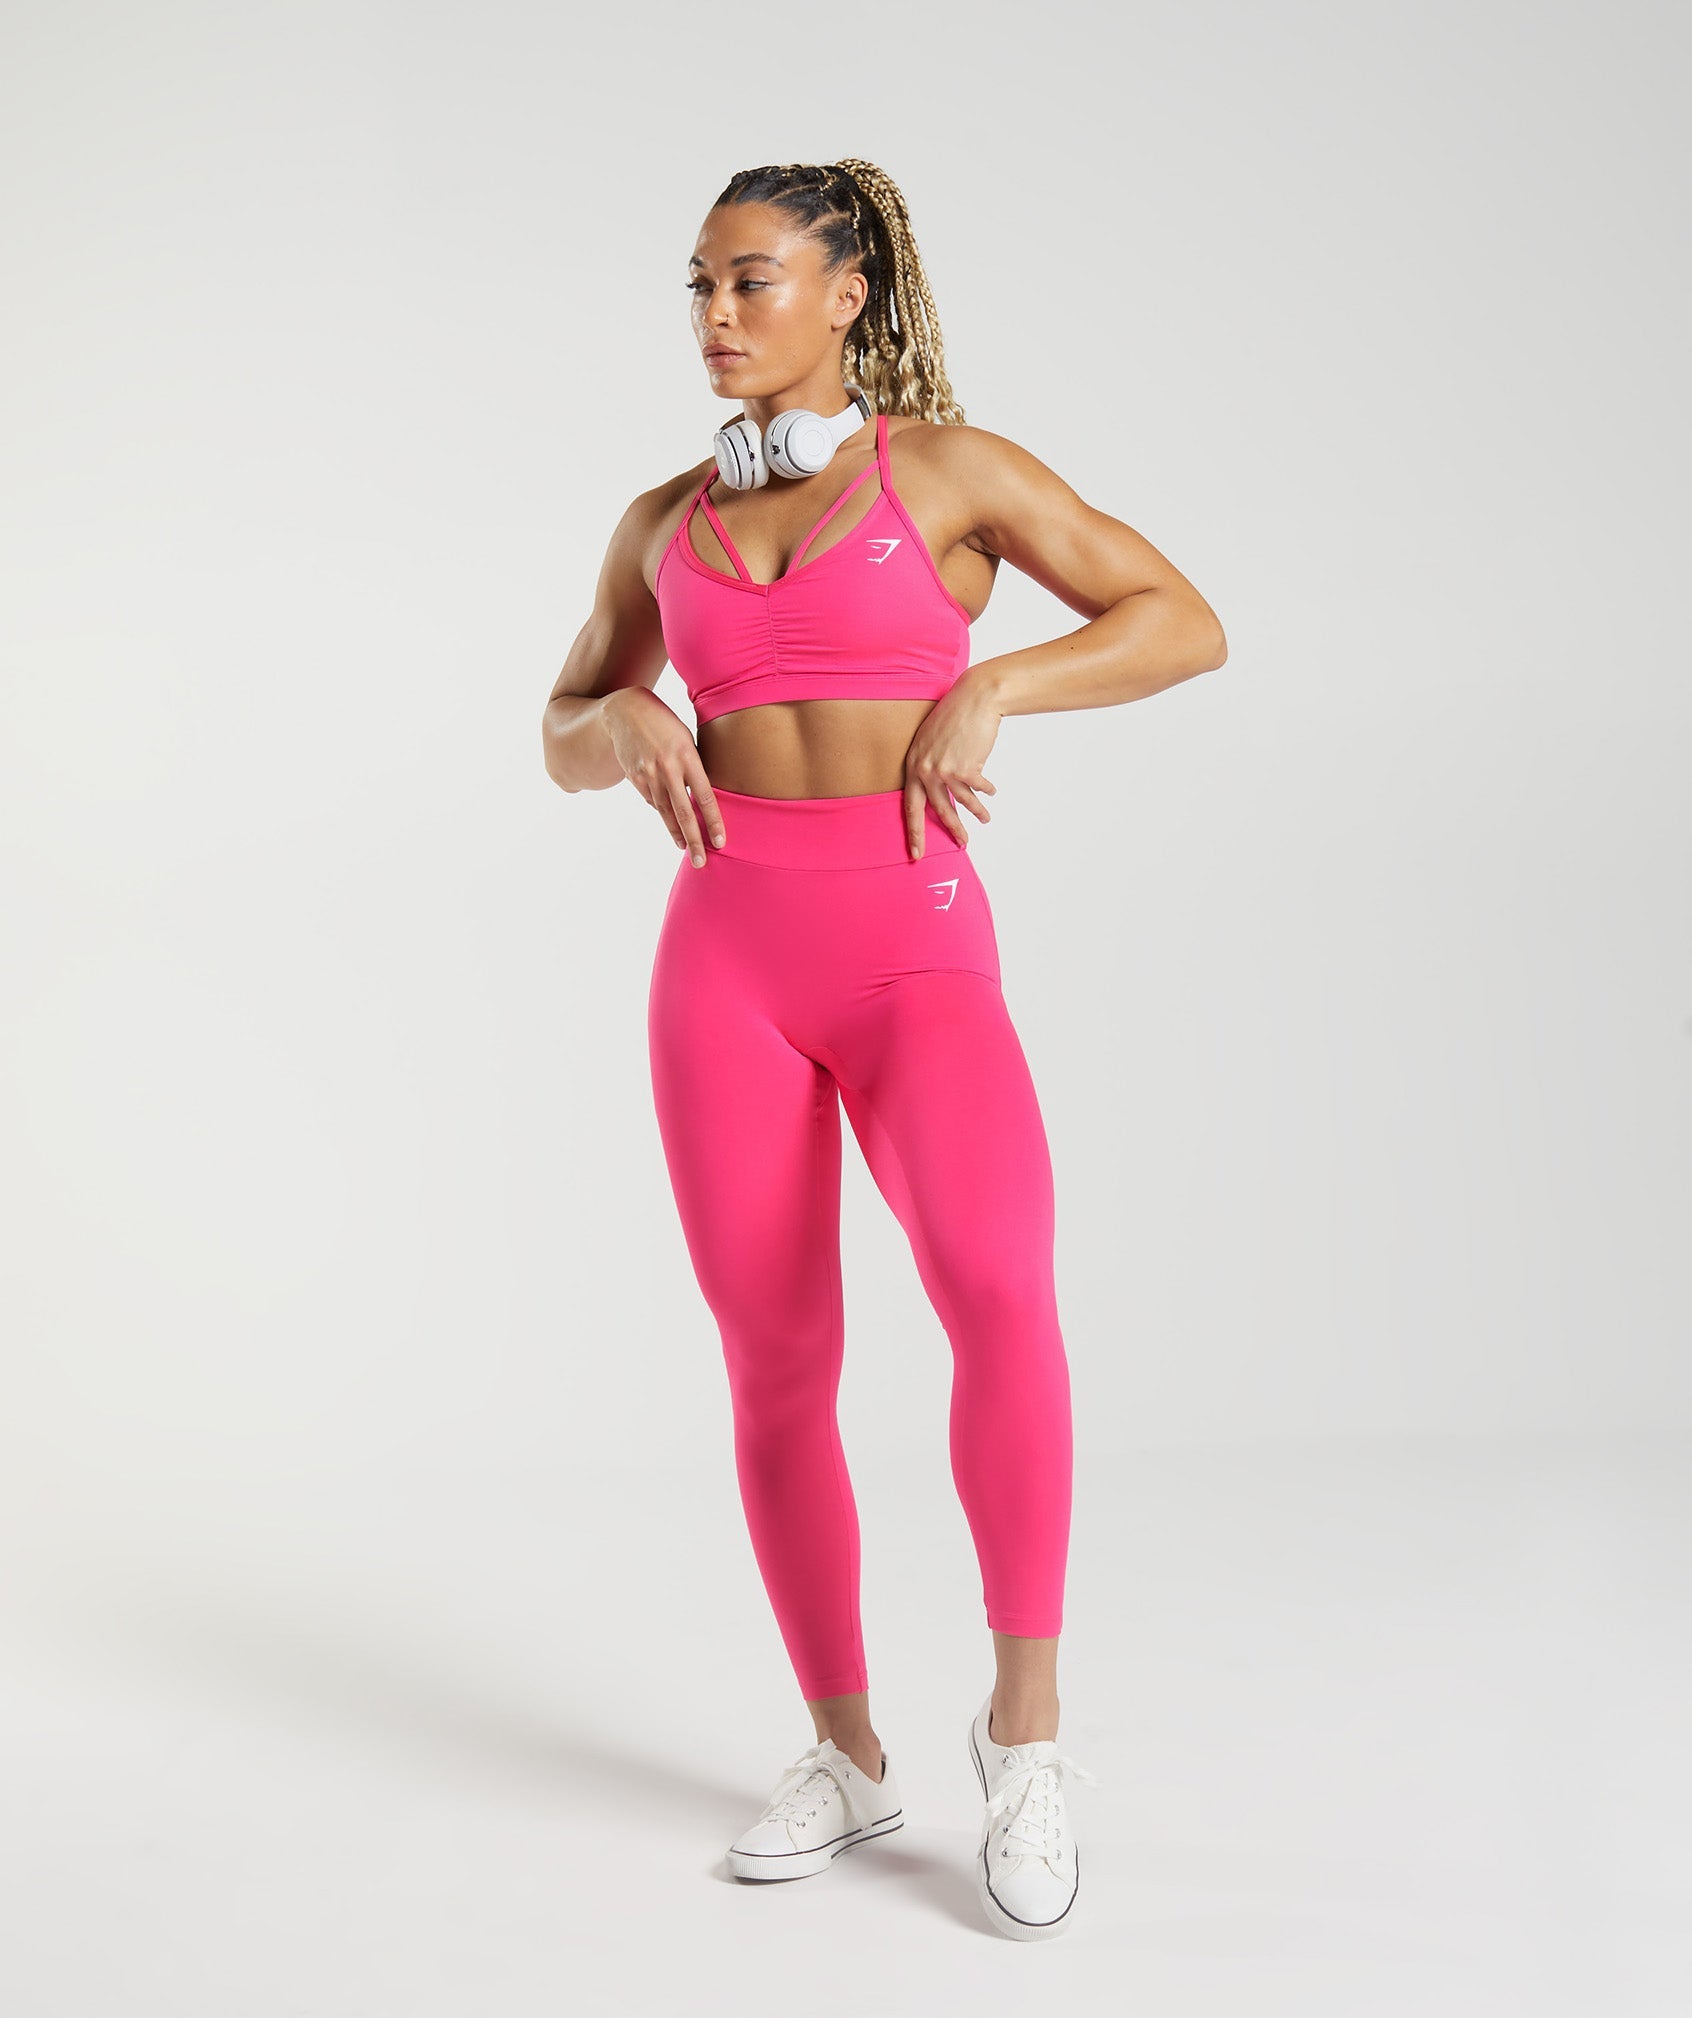 Gymshark Womens Sports Bra Size Small Rose Pink Strappy Captivate - $18 -  From Katie